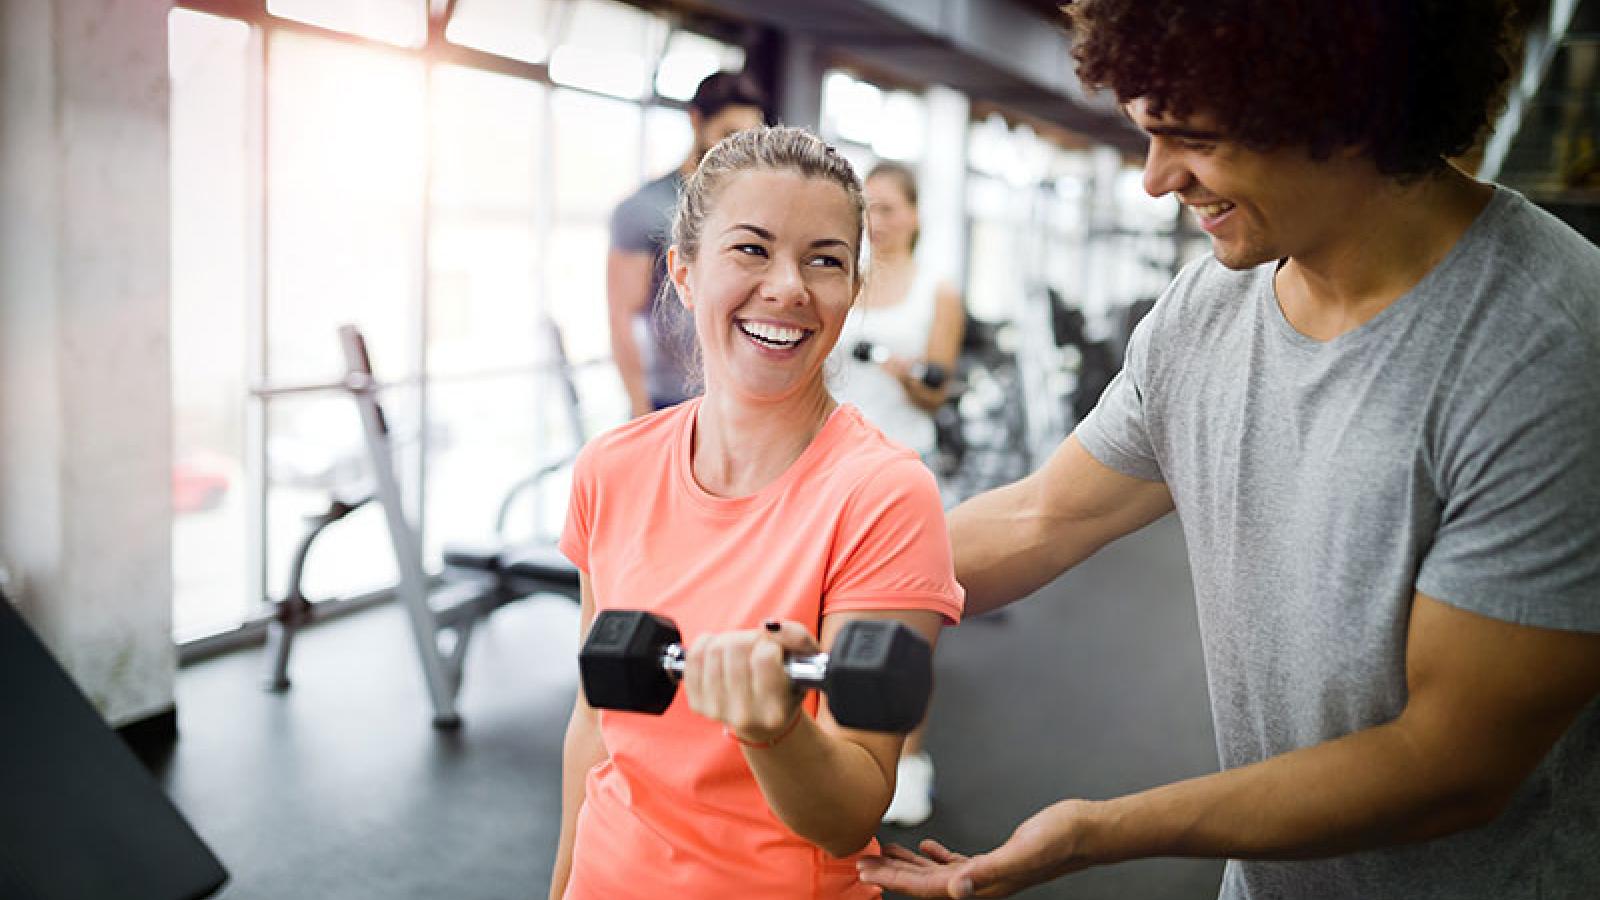 Is Personal Training Worth the Cost?